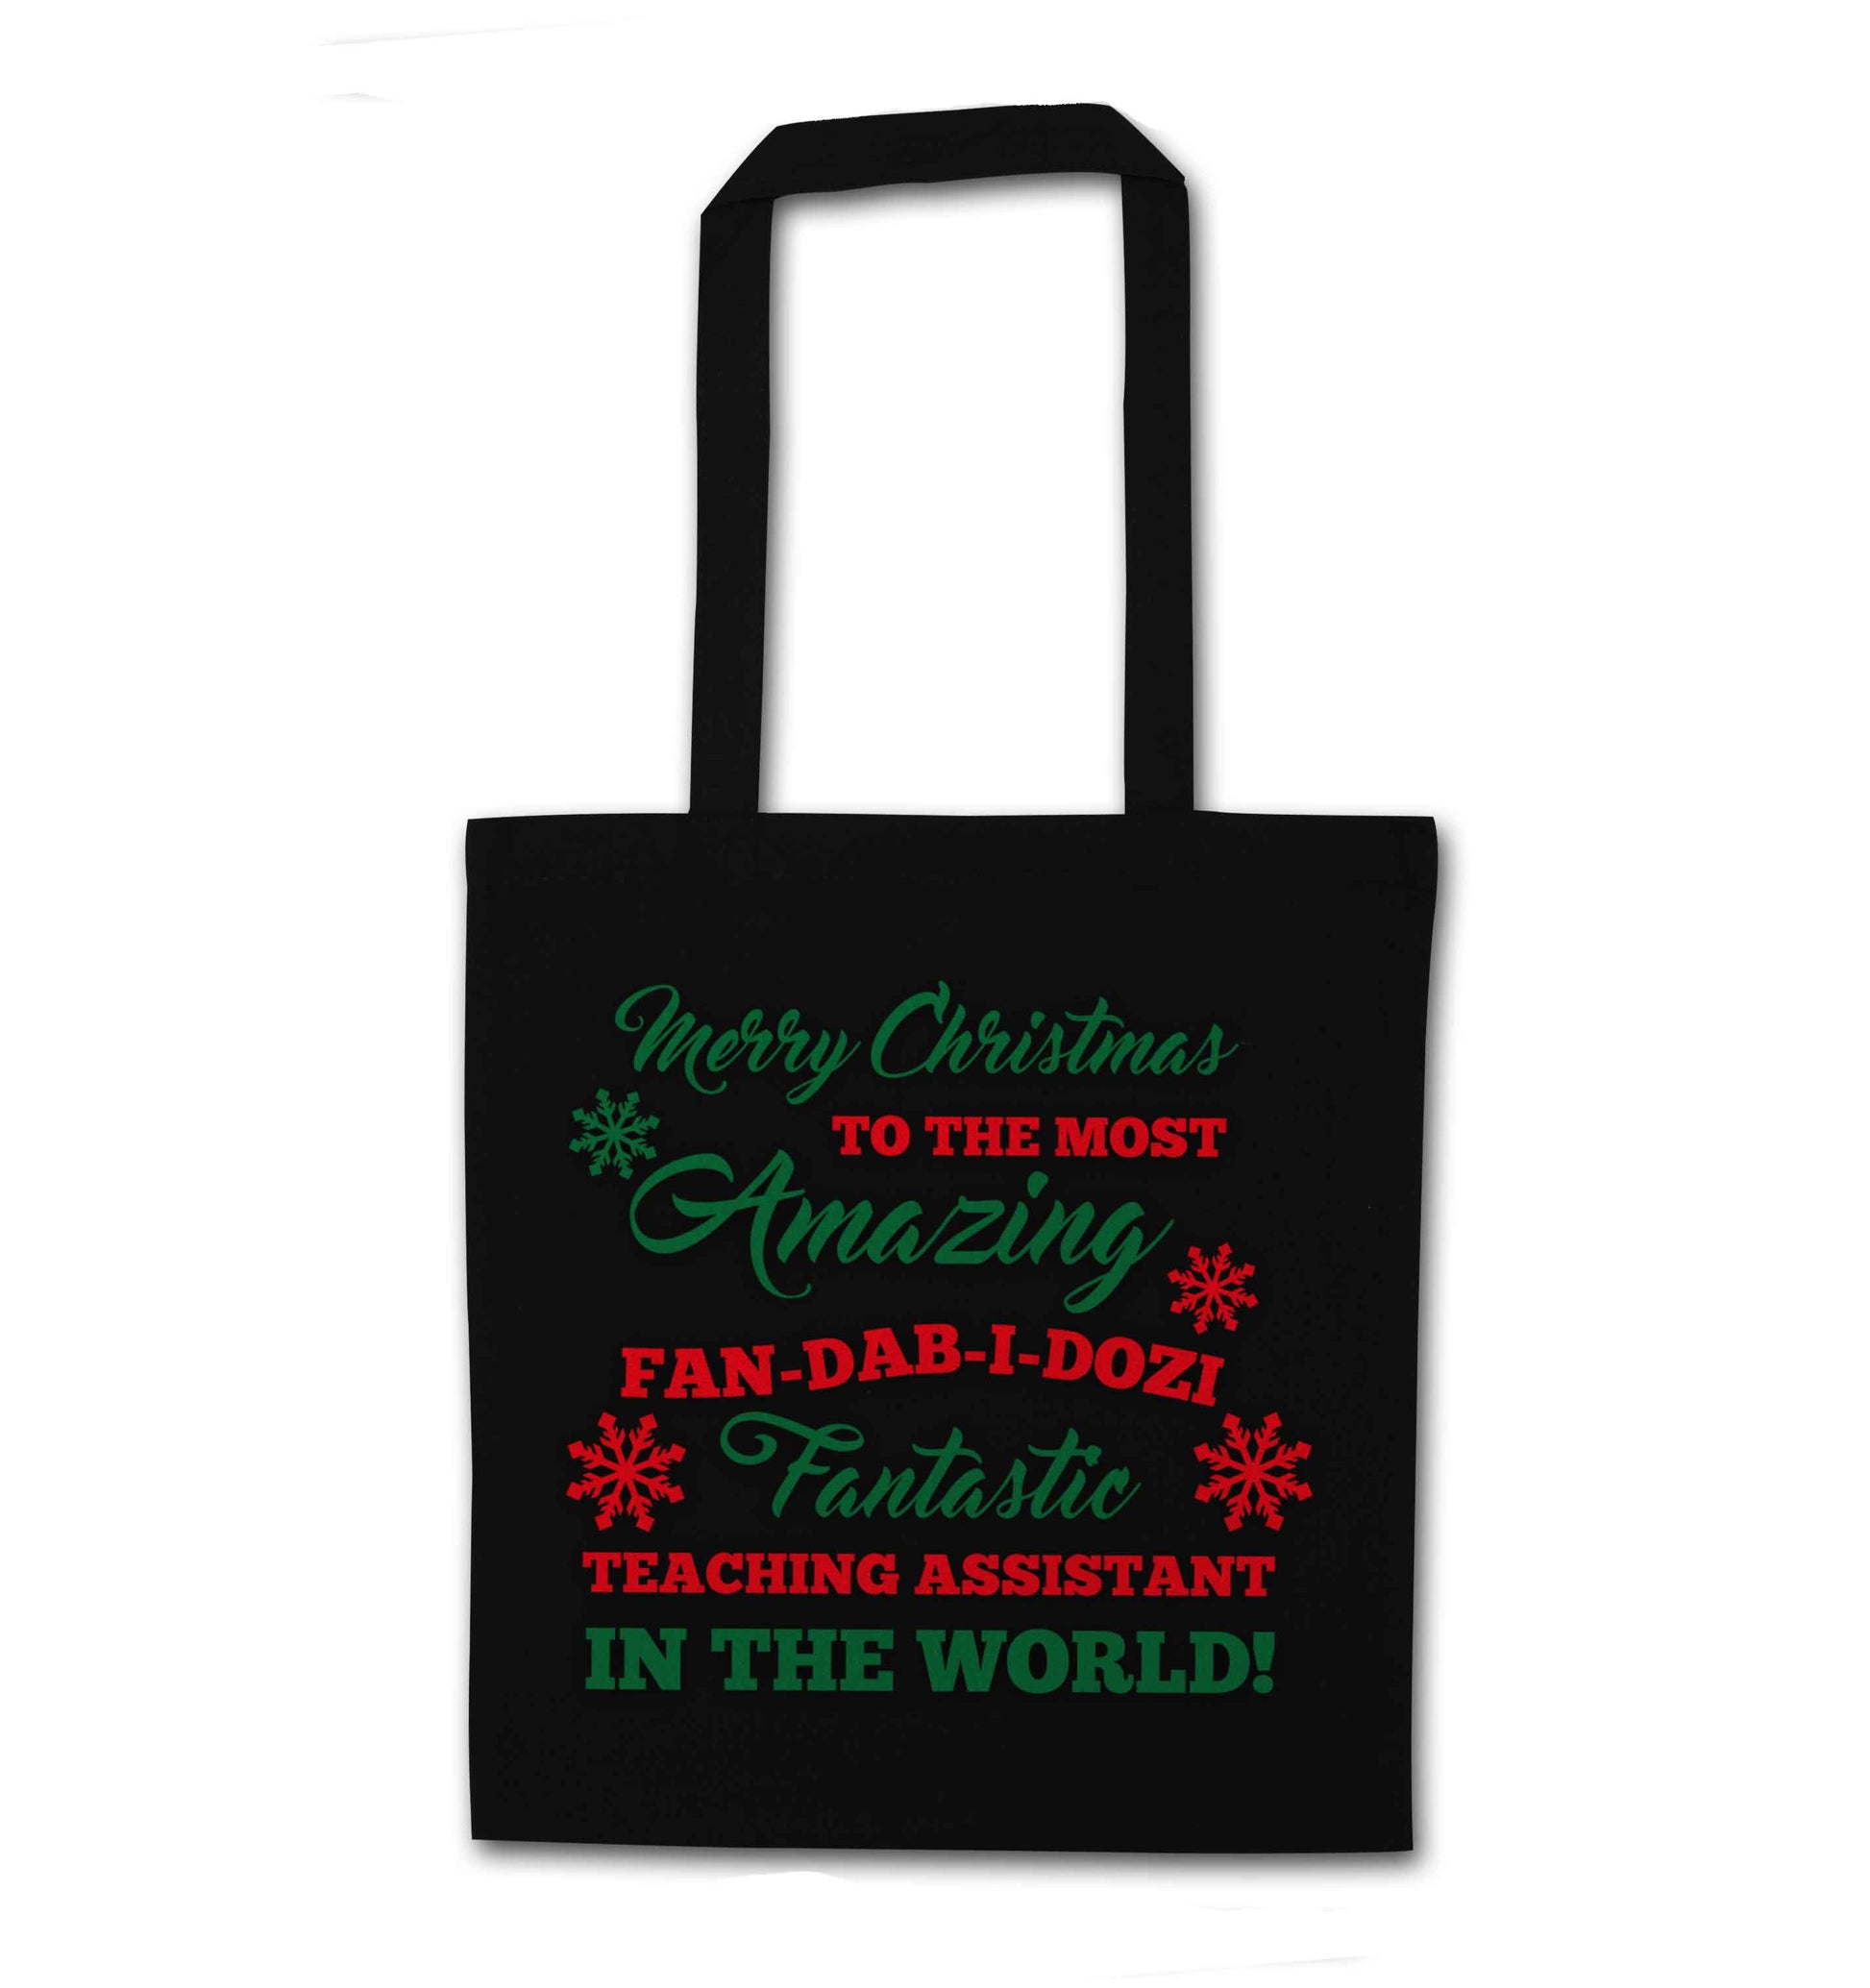 Merry Christmas to the most amazing fan-dab-i-dozi fantasic teaching assistant in the world black tote bag